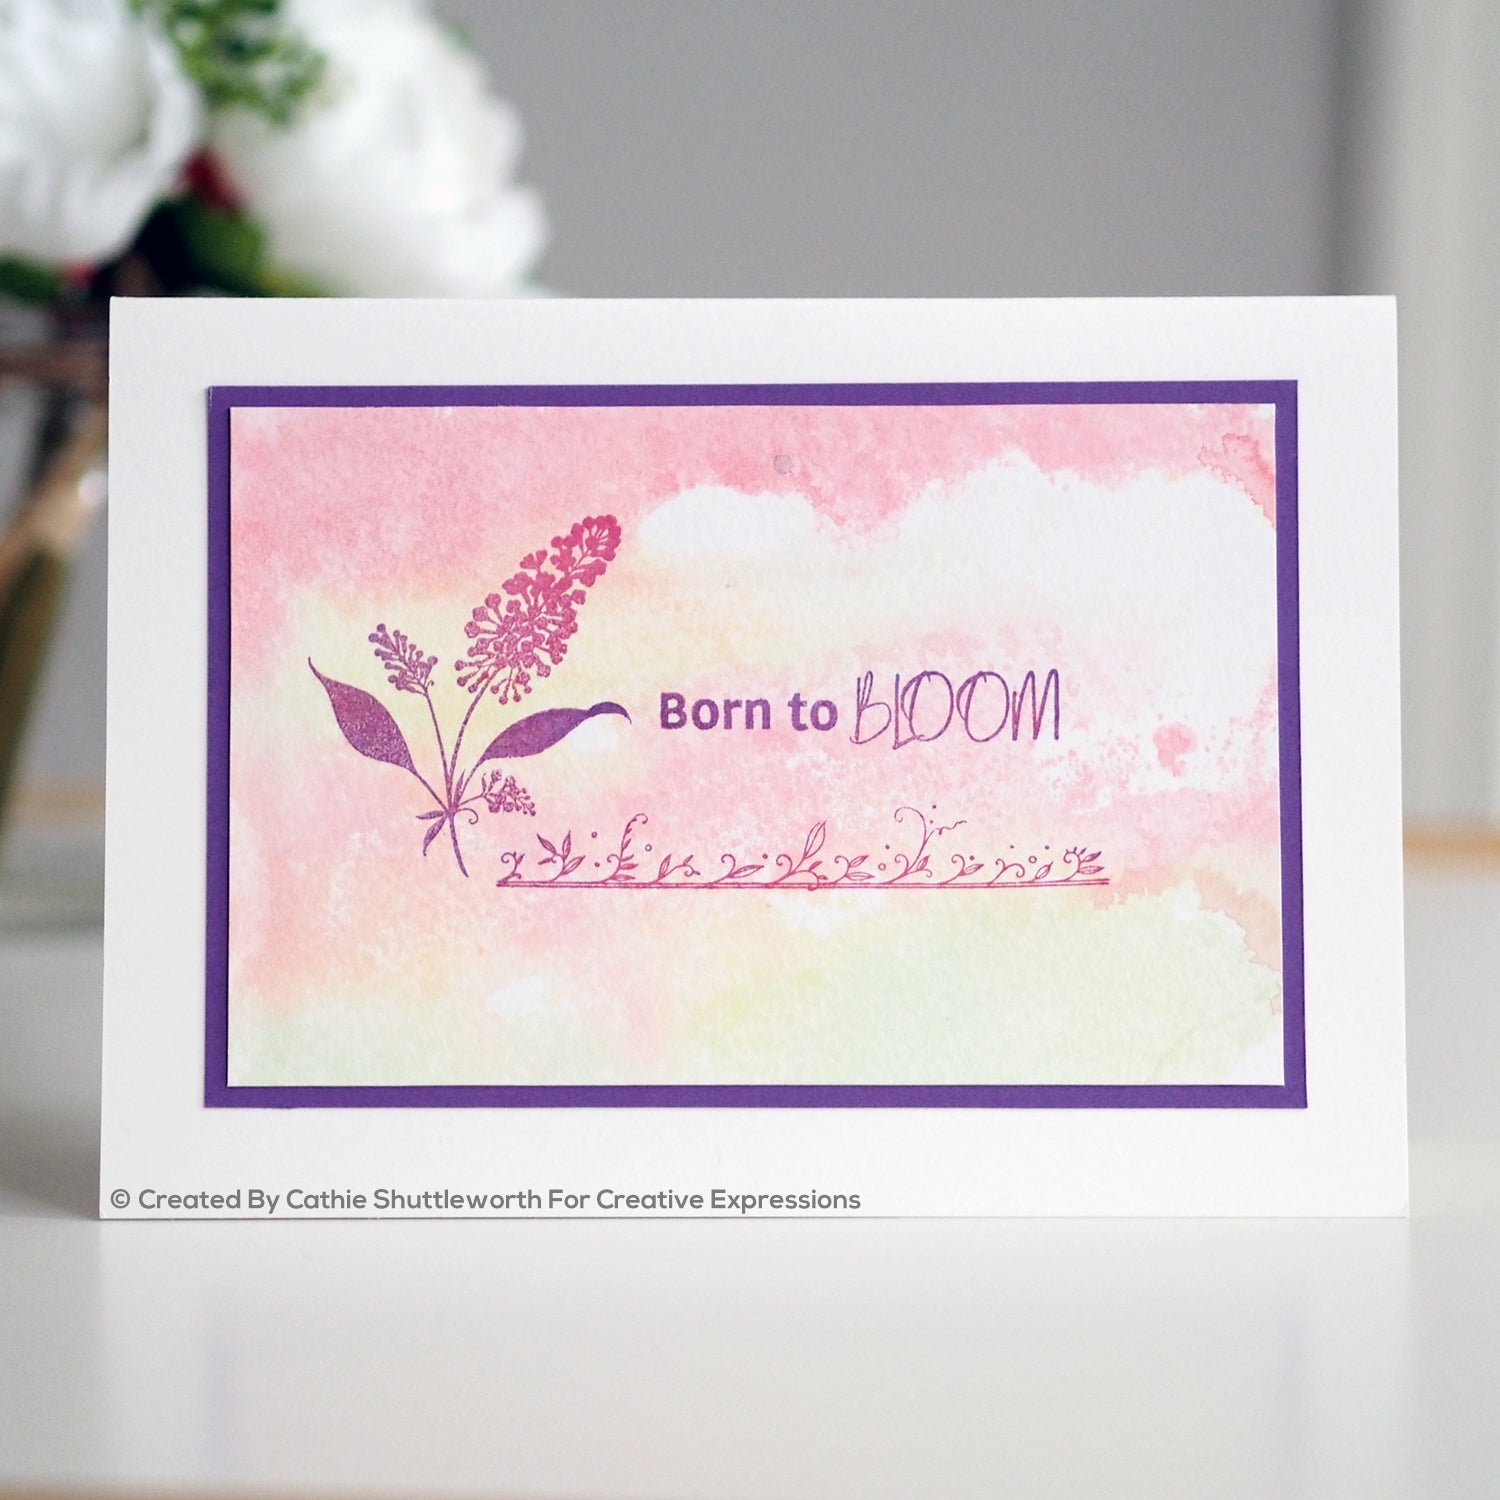 Pink Ink Designs Luscious Lilac A5 Clear Stamp Set